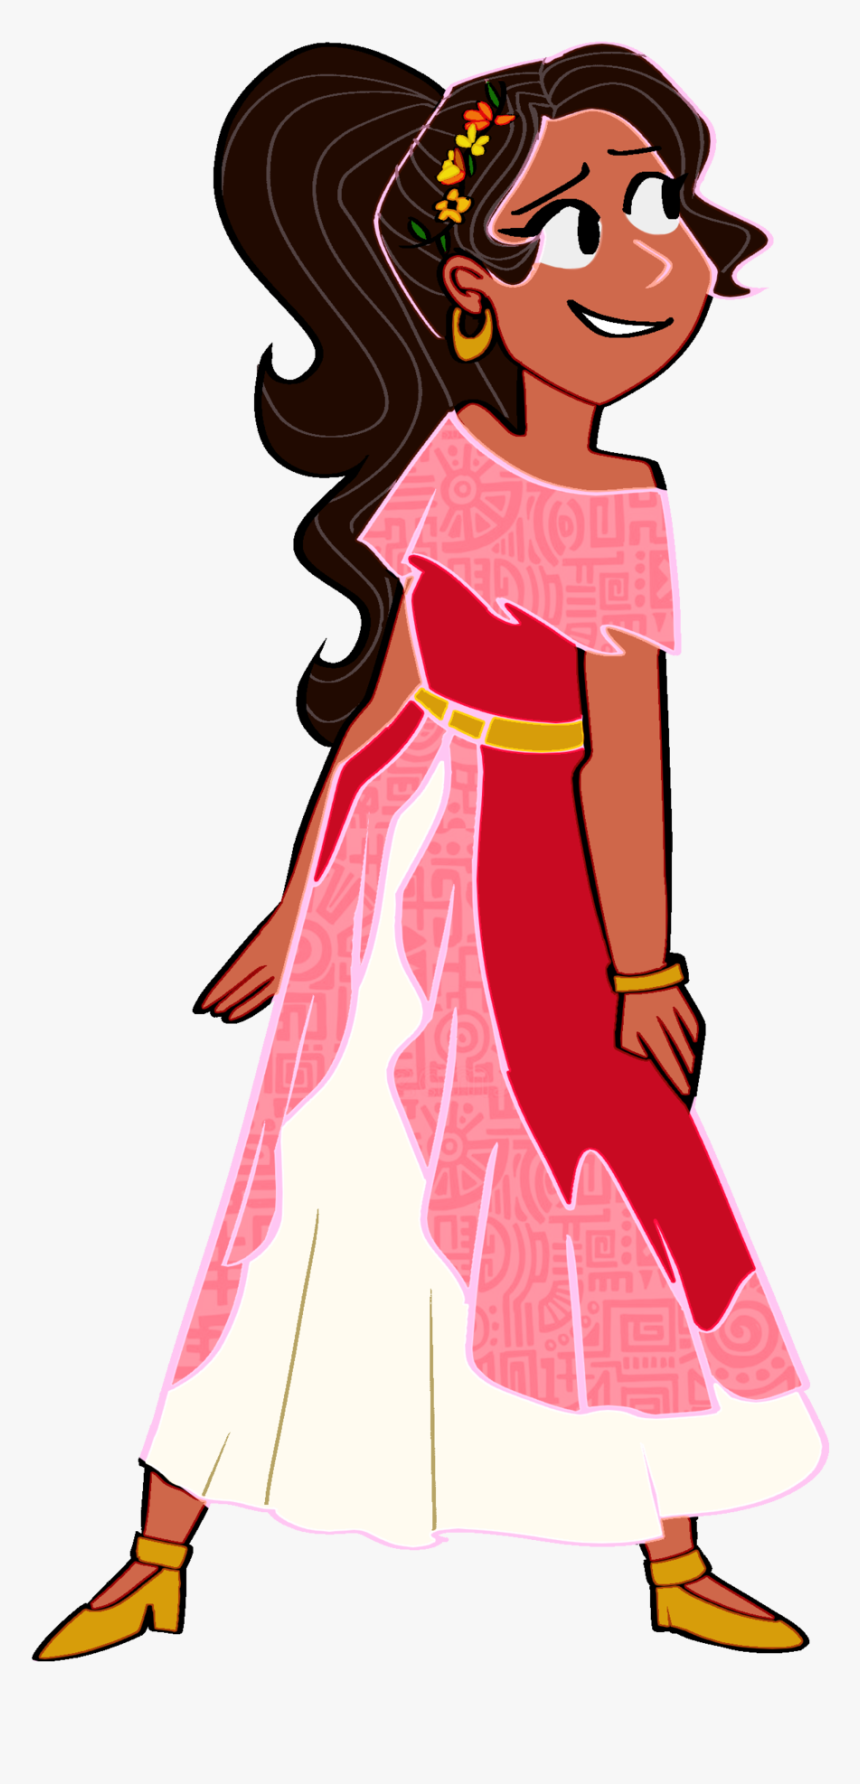 “elena Of Avalor Is One Of My Fave Disney Cartoons - Milo Murphy's Law Amanda, HD Png Download, Free Download